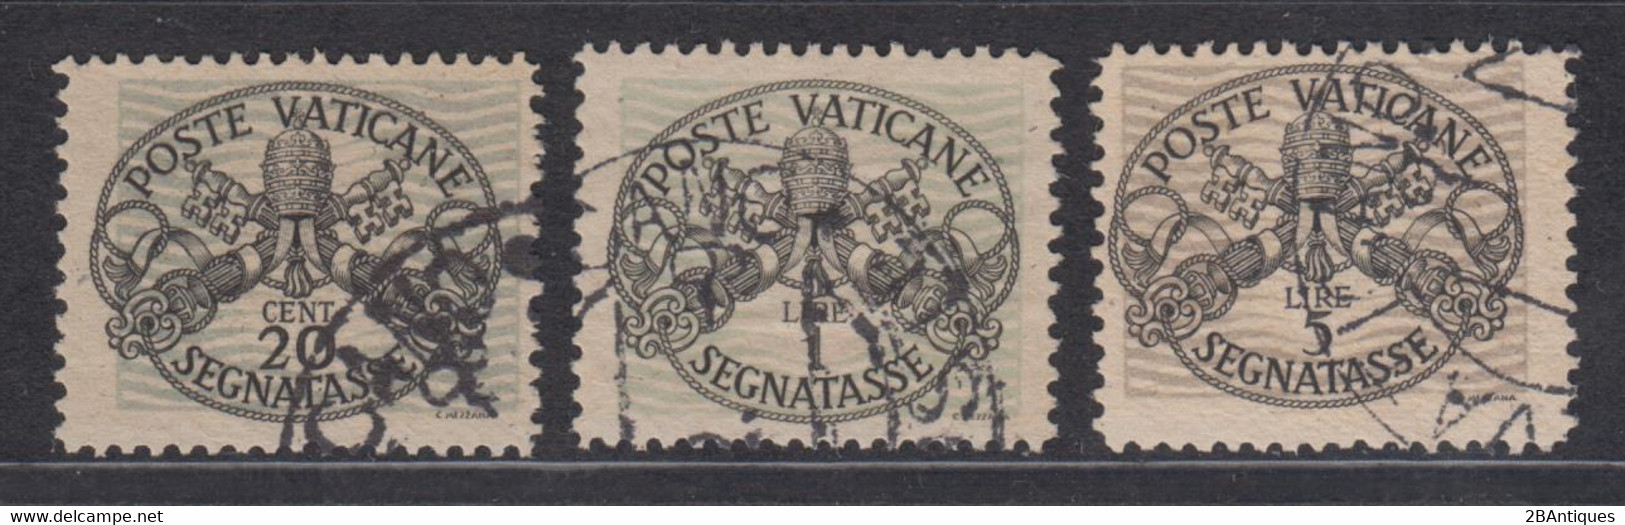 VATICANE 1931 - Postage Due Type II Thick Lines, Grey Paper RARE! - Postage Due